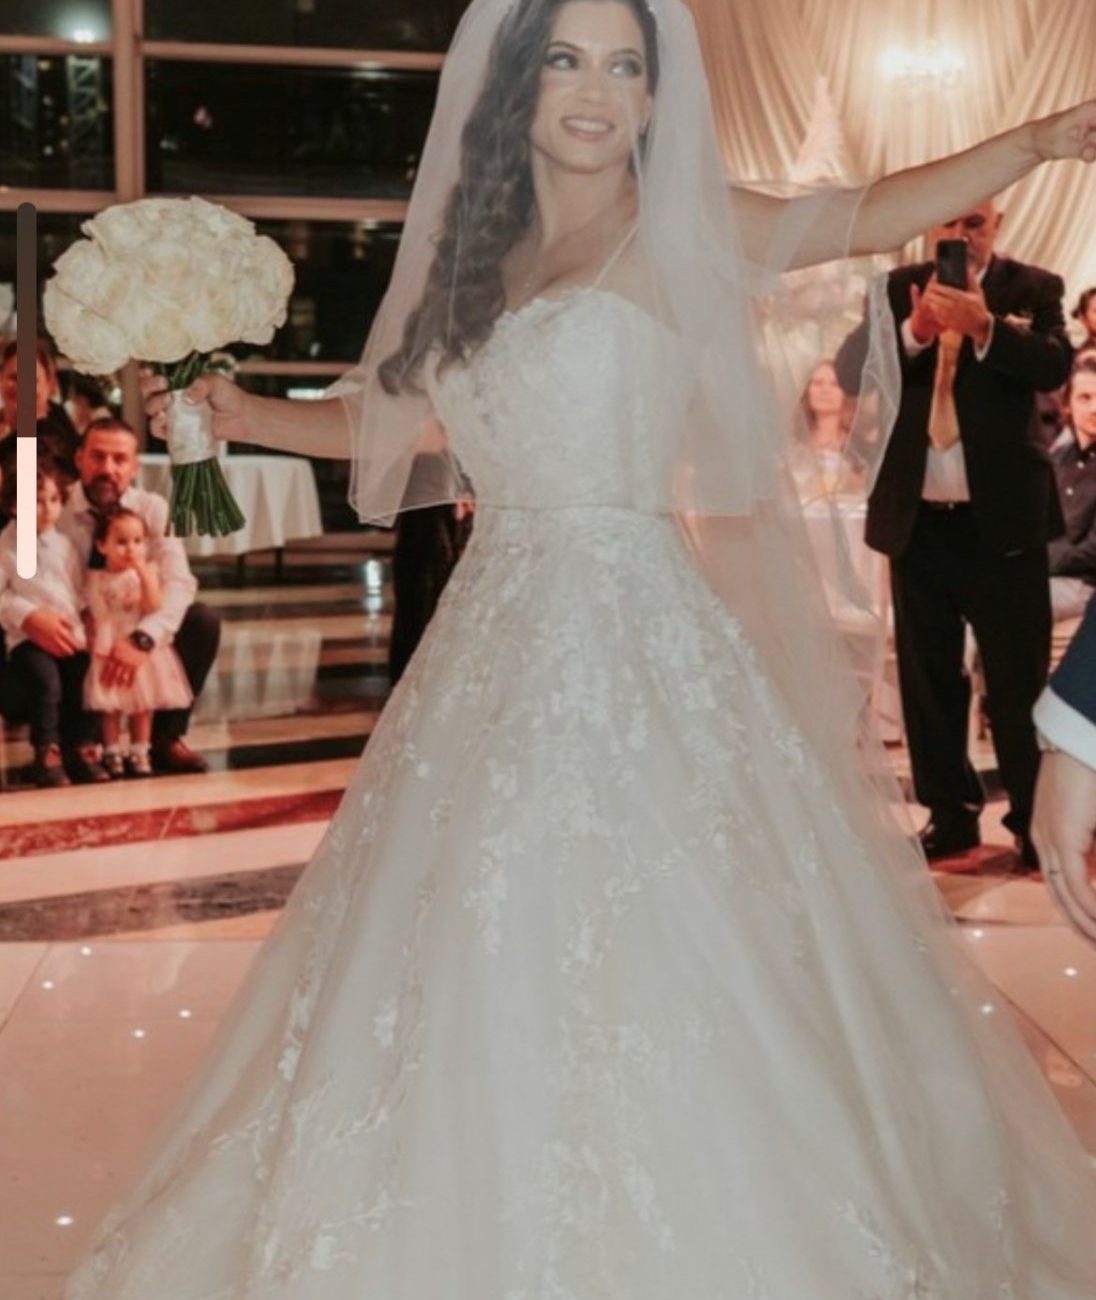 REAL BRIDE NESE